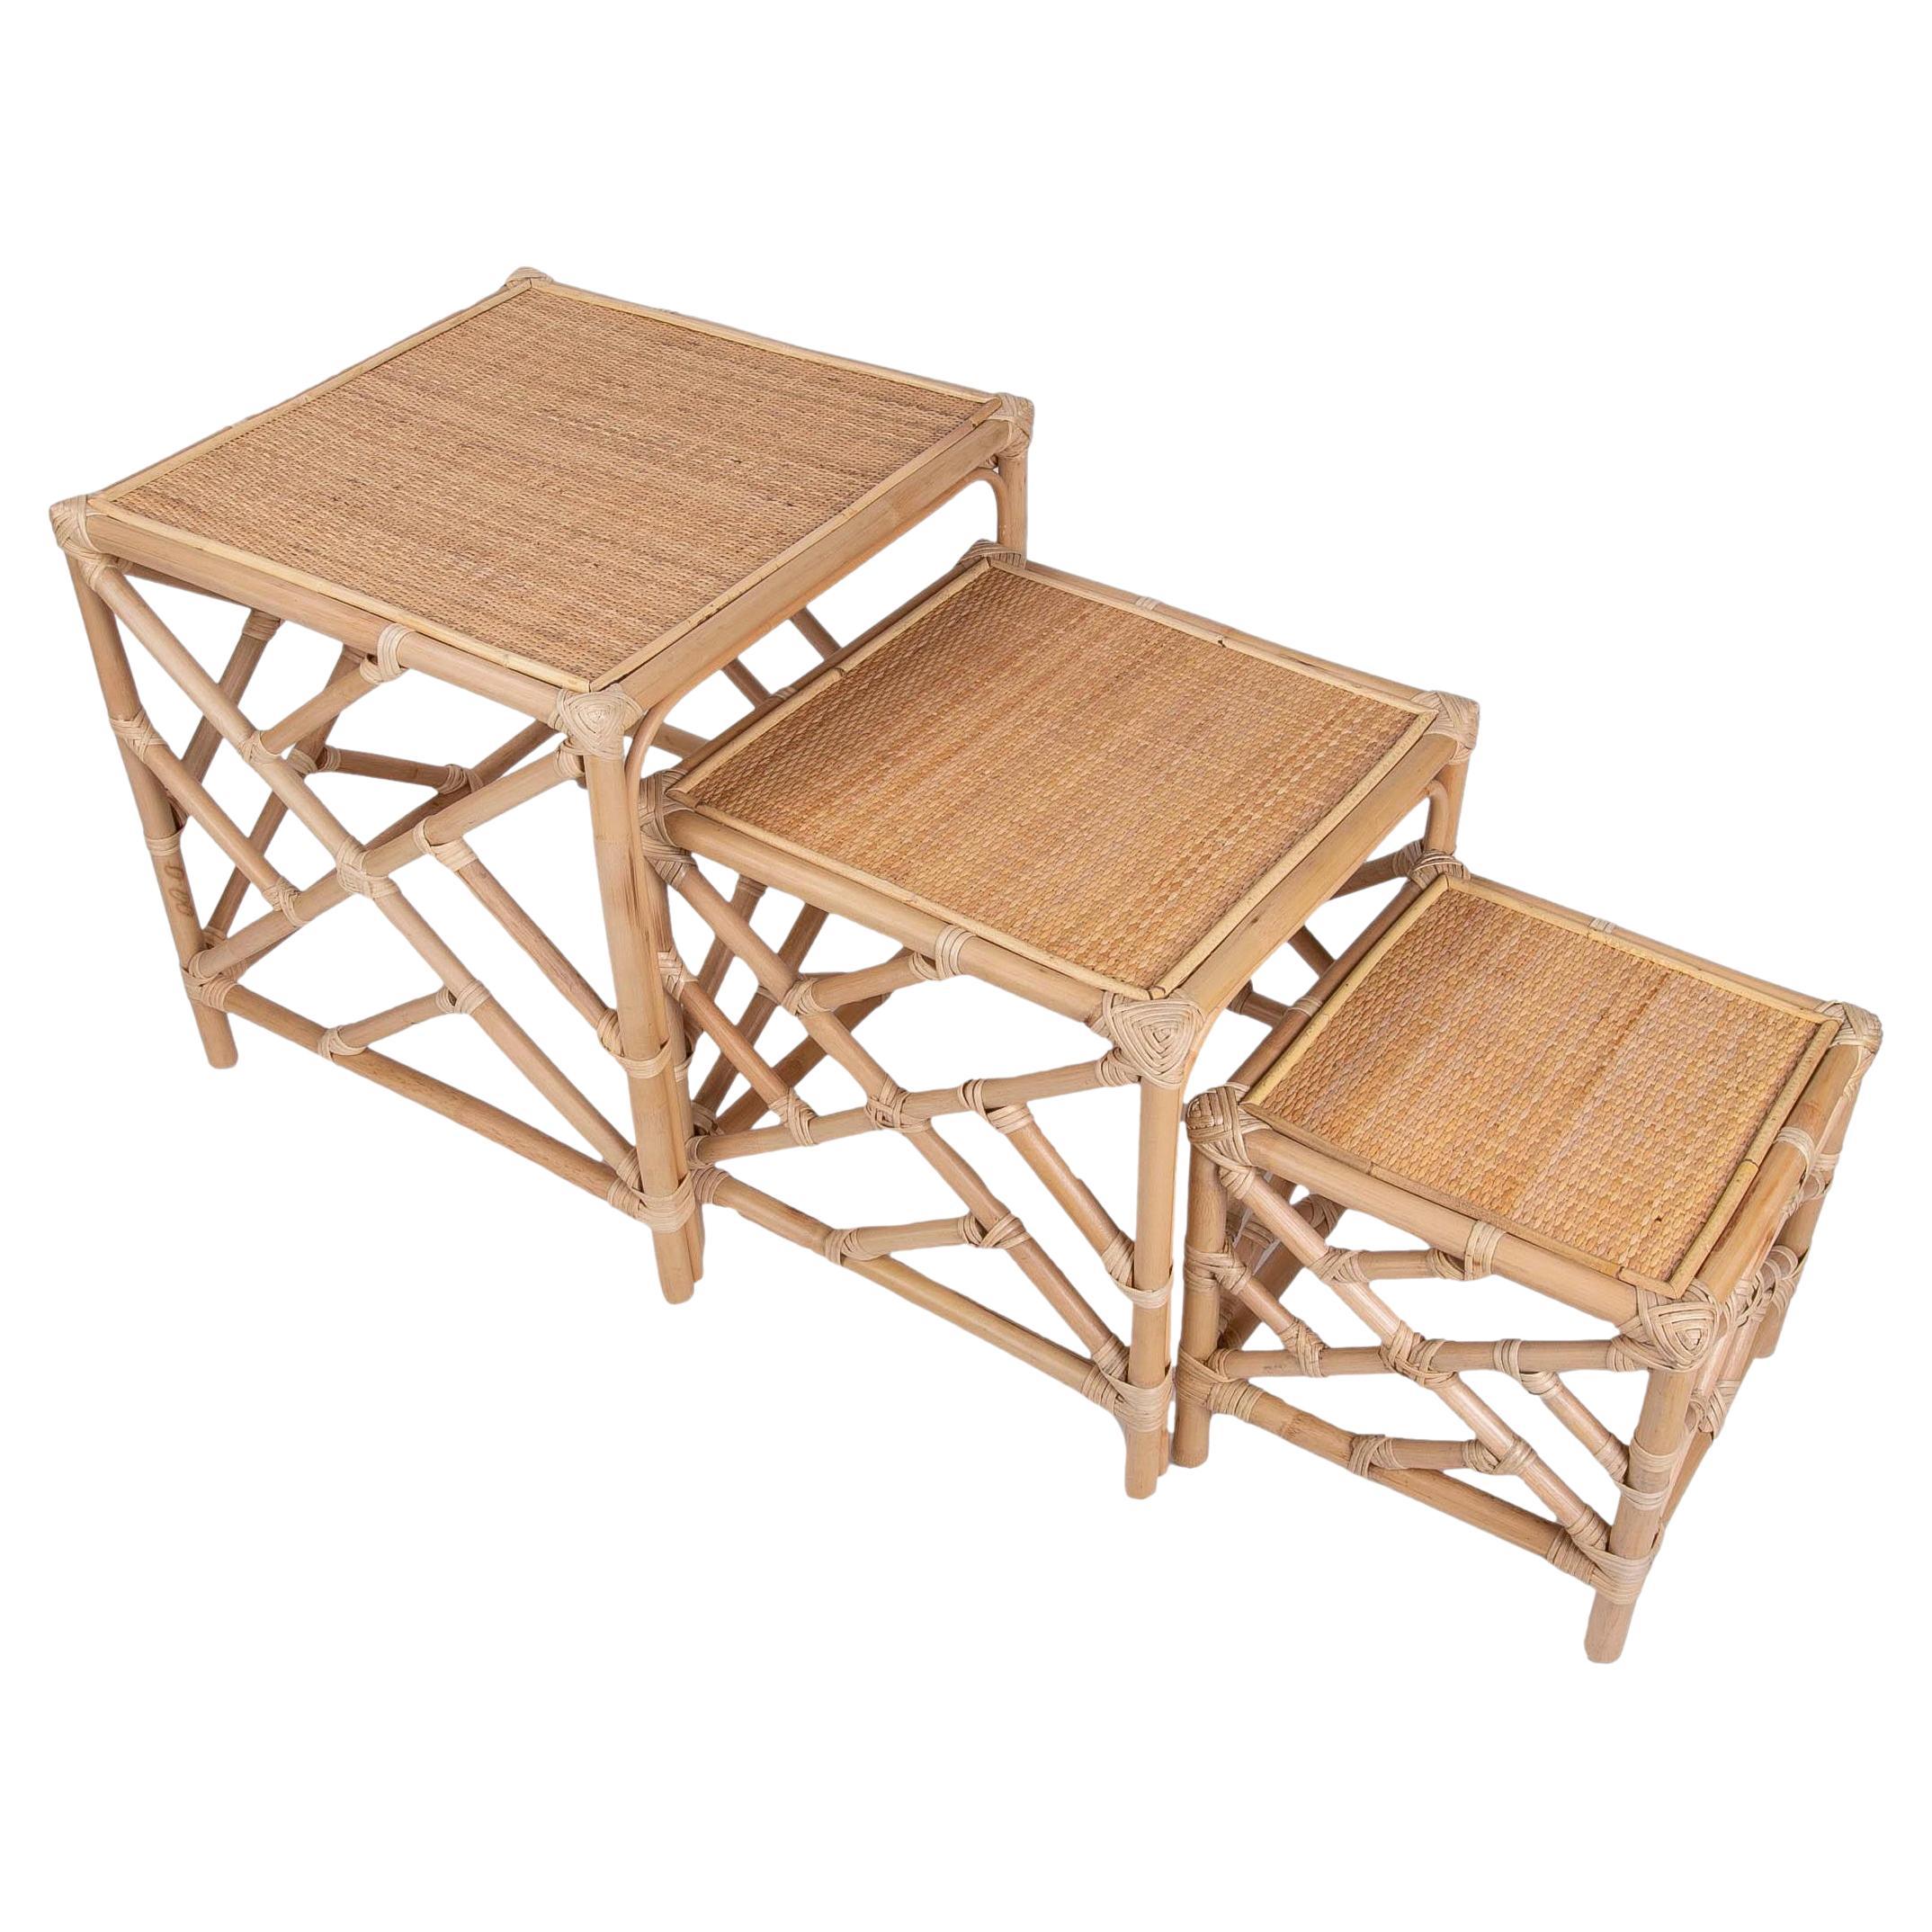 Bamboo and wicker Nesting Table Consisting of Three Tables in Different Sizes